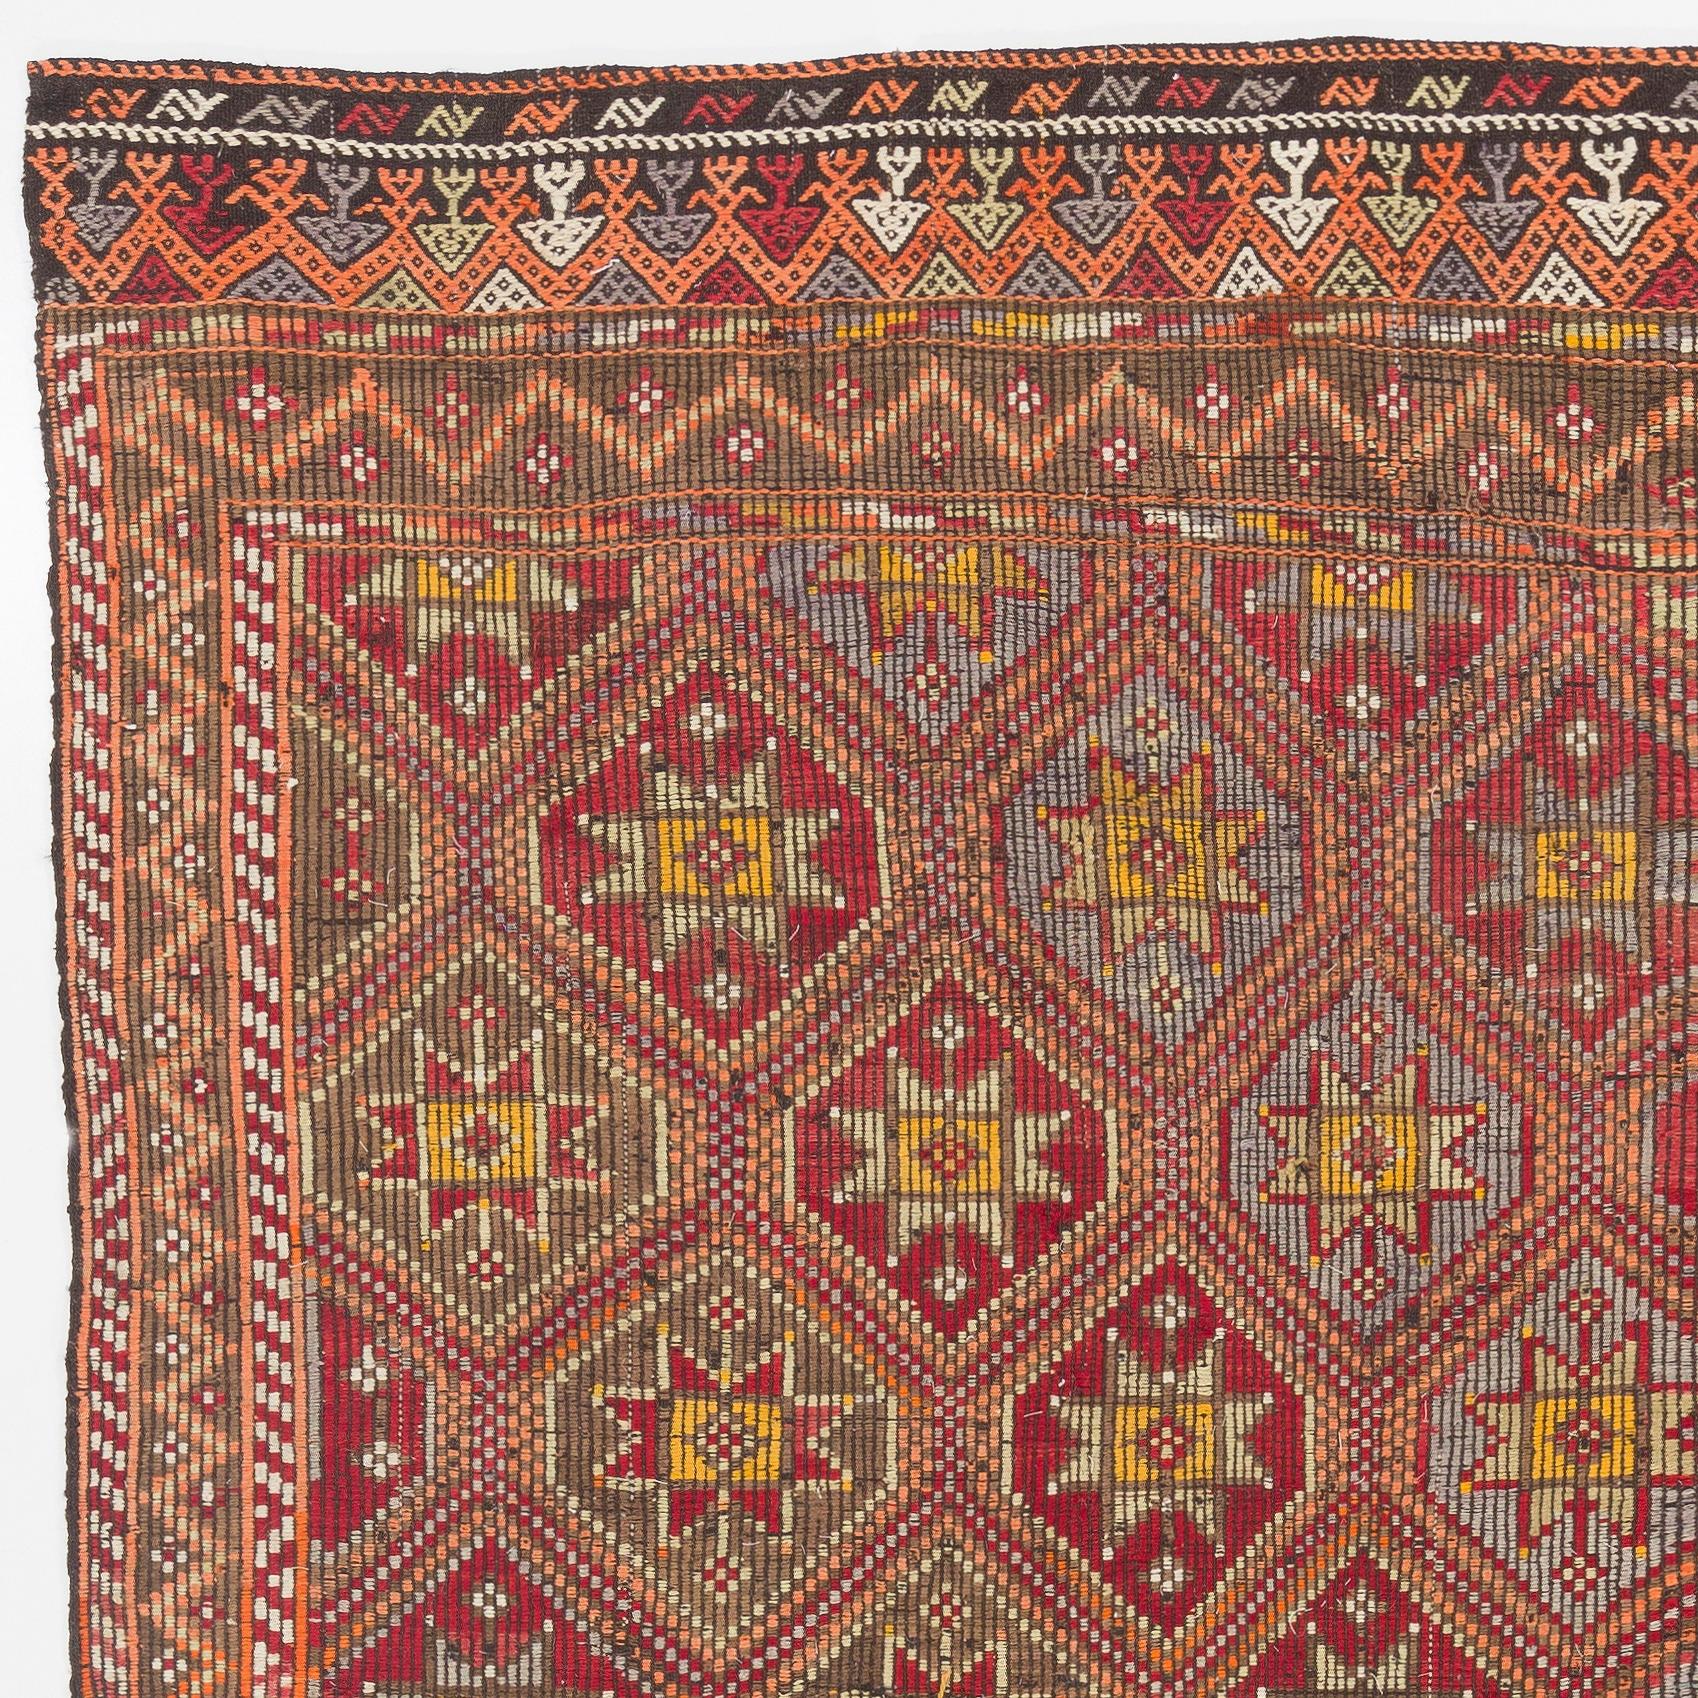 This attractive flat-weave rug is handwoven in fine local wool to create a sturdy floor covering. This type of Kilims (woven in the intricate 